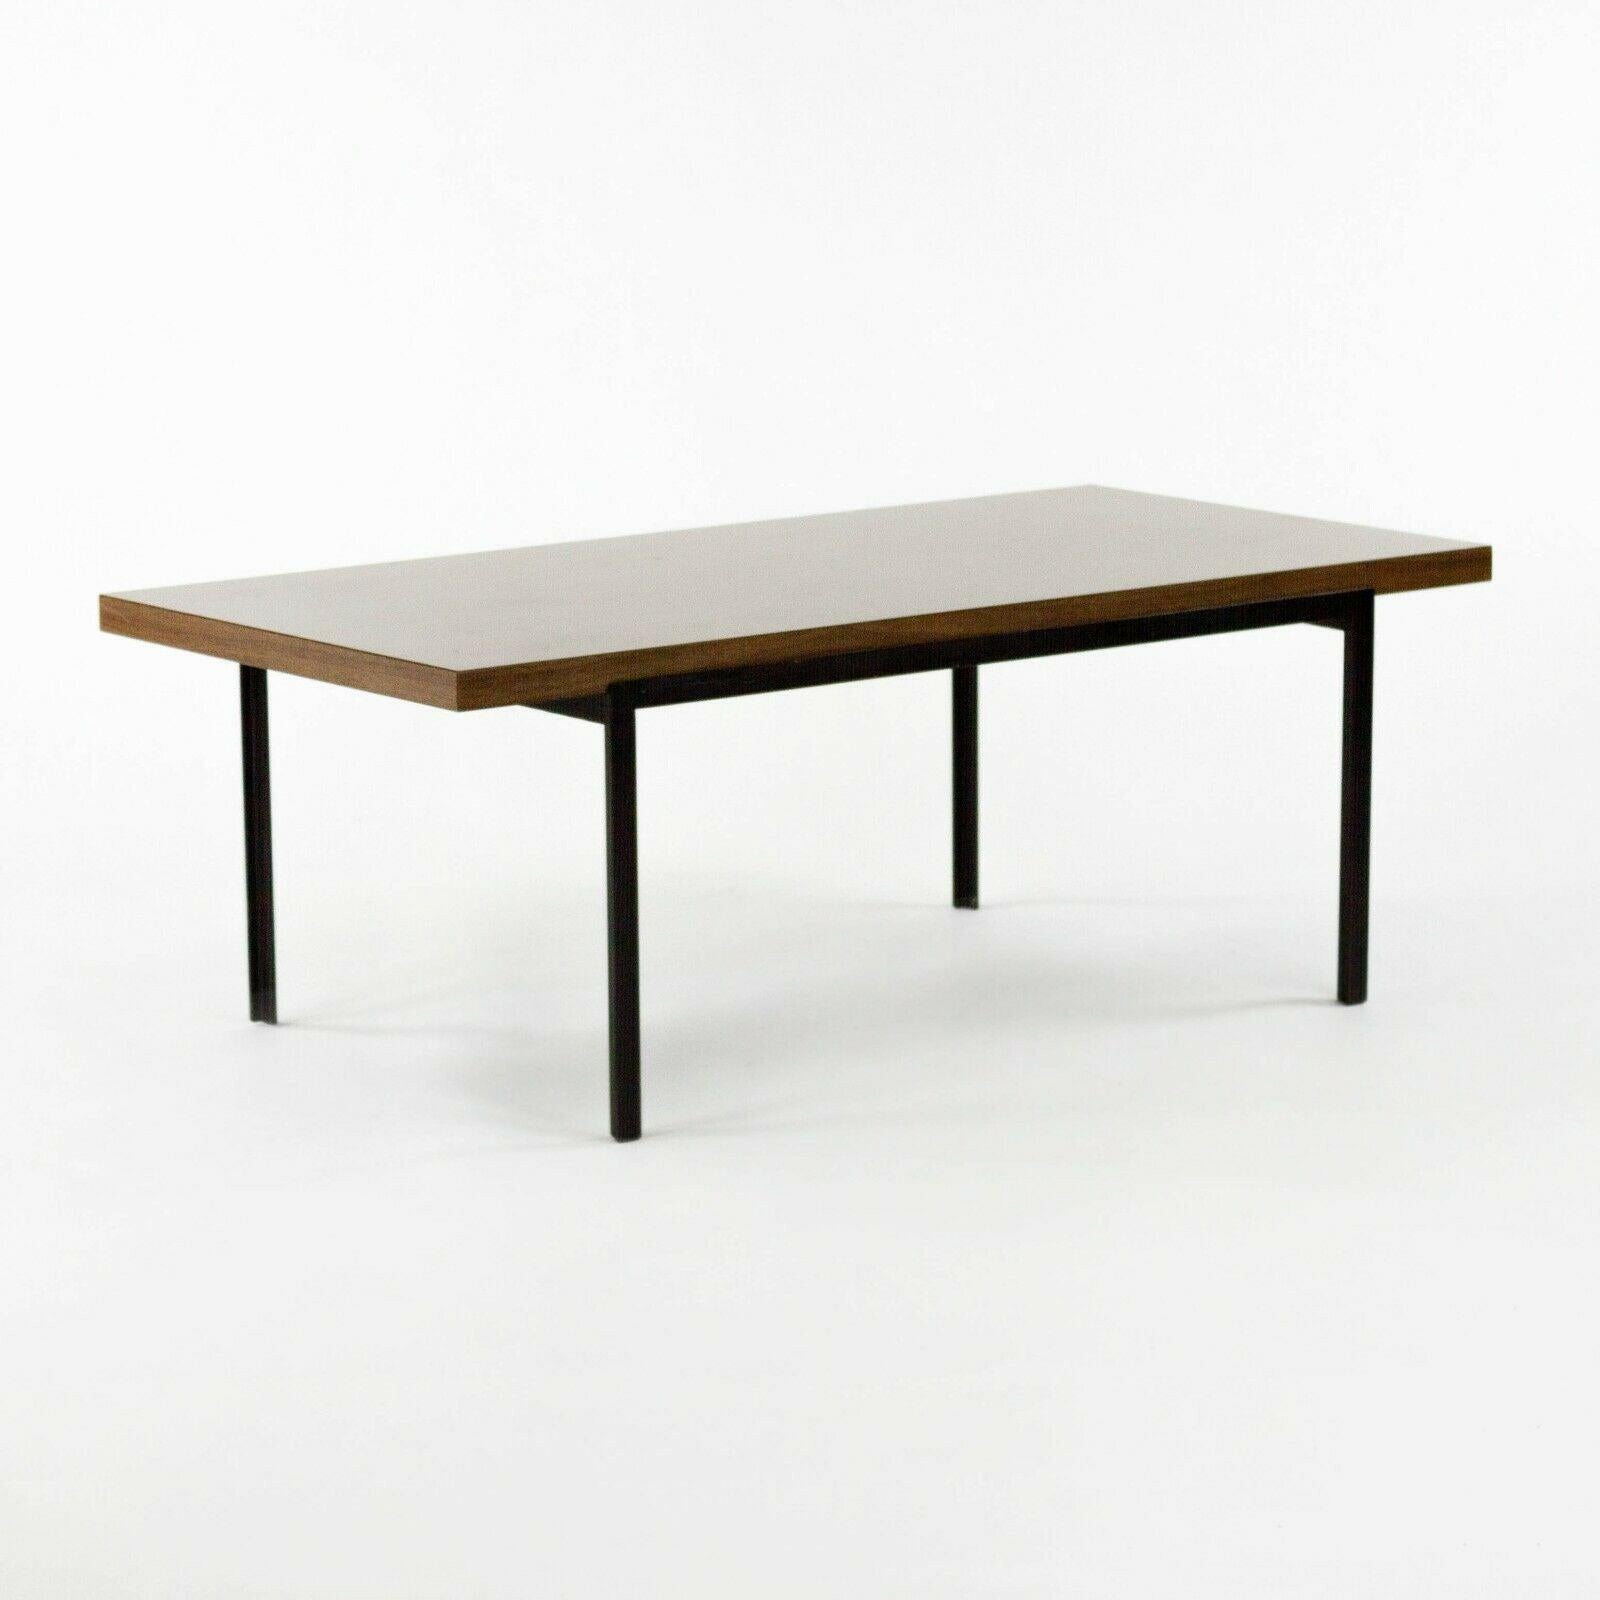 Listed for sale is a super rare, limited production T Angle coffee table, produced by Knoll Associates. This is an early and unique Florence Knoll design, which is noted in the 